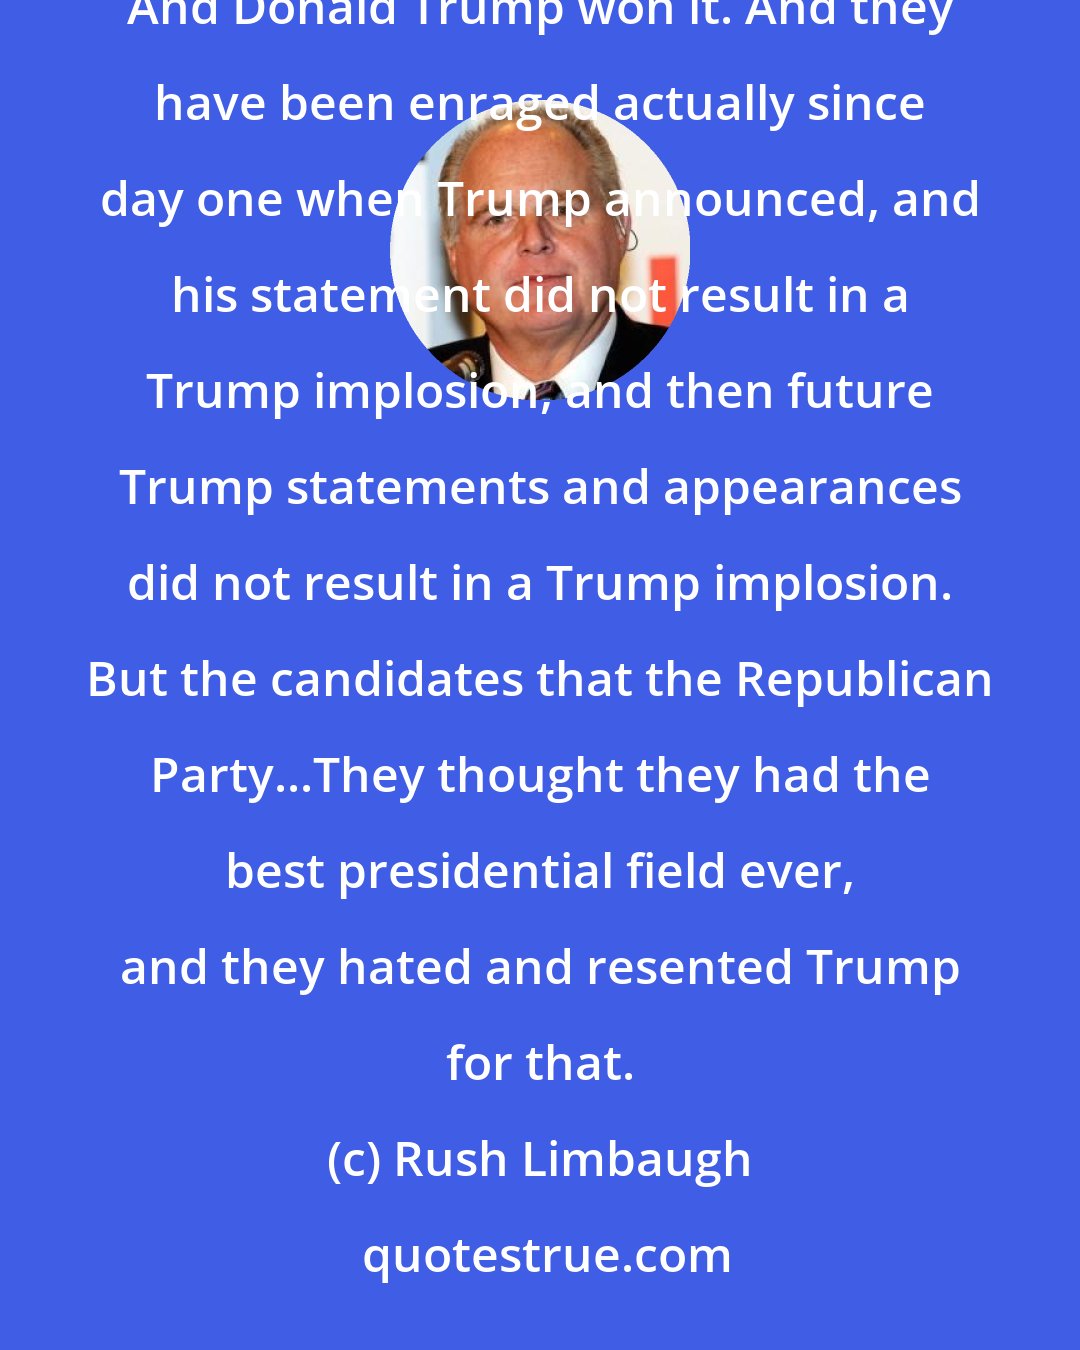 Rush Limbaugh: Here you have the Republican Party, and they had, what, 16, 15 candidates seek the Republican nomination? And Donald Trump won it. And they have been enraged actually since day one when Trump announced, and his statement did not result in a Trump implosion, and then future Trump statements and appearances did not result in a Trump implosion. But the candidates that the Republican Party...They thought they had the best presidential field ever, and they hated and resented Trump for that.